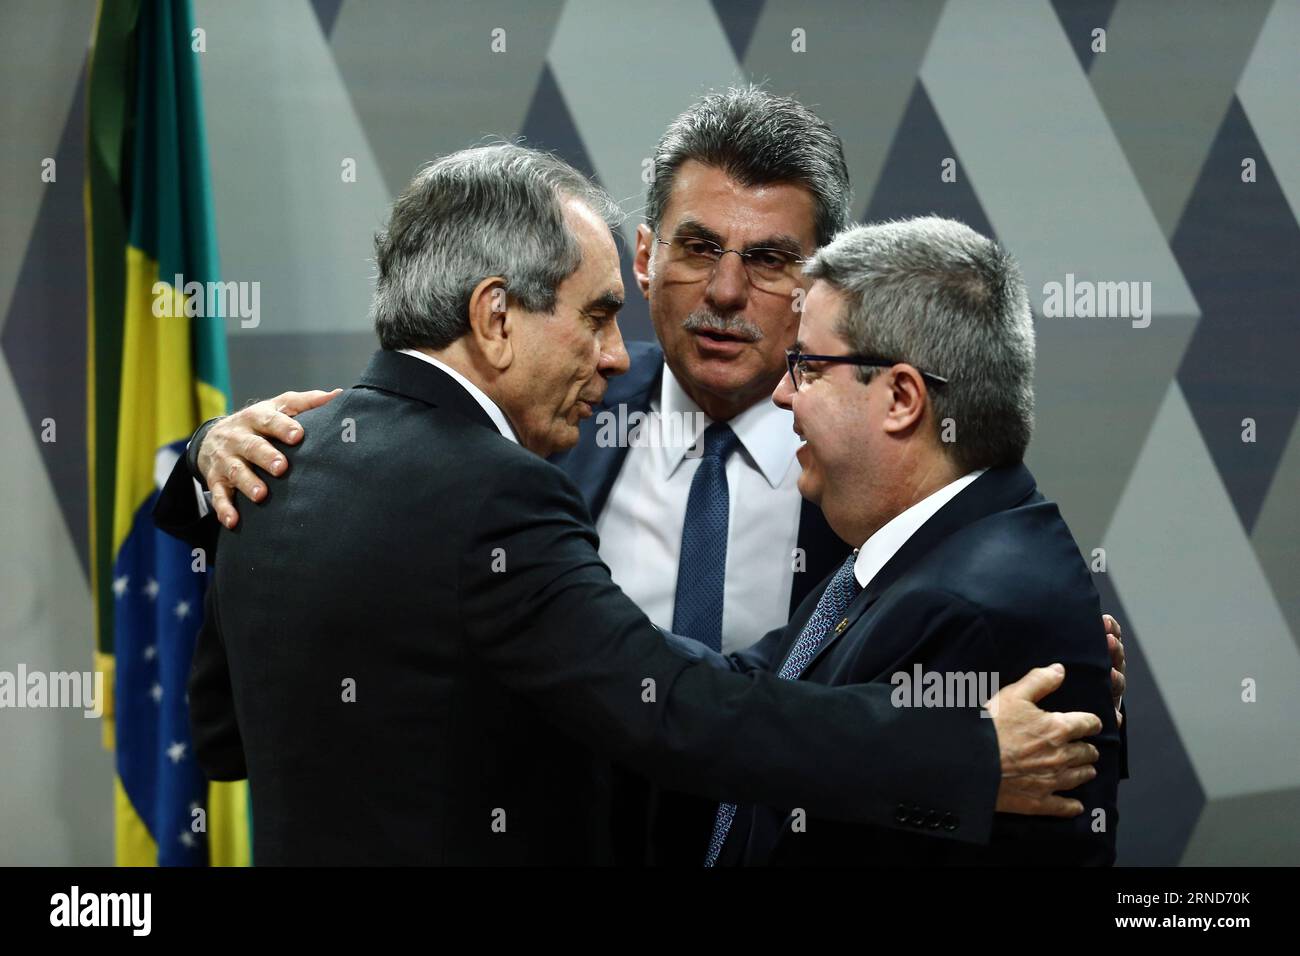 (160506) -- BRASILIA, May 6, 2016 -- Senator Raimundo Lira (L), member of Brazilian Democratic Movement Party (PMDB) and the president of a special senate committee that will consider Brazil s President Dilma Rousseff s impeachment, Senator Romero Juca (C) from PMDB, and Senator Antonio Anastasia (R), member of Brazilian Social Democratic Party (PSDB) and the rapporteur of the committee, have talks during the vote session of the report on impeachment proceedings in Brasilia, Brazil, on May 6, 2016. A Brazilian Senate committee voted on Fiday in favor of opening an impeachment against President Stock Photo